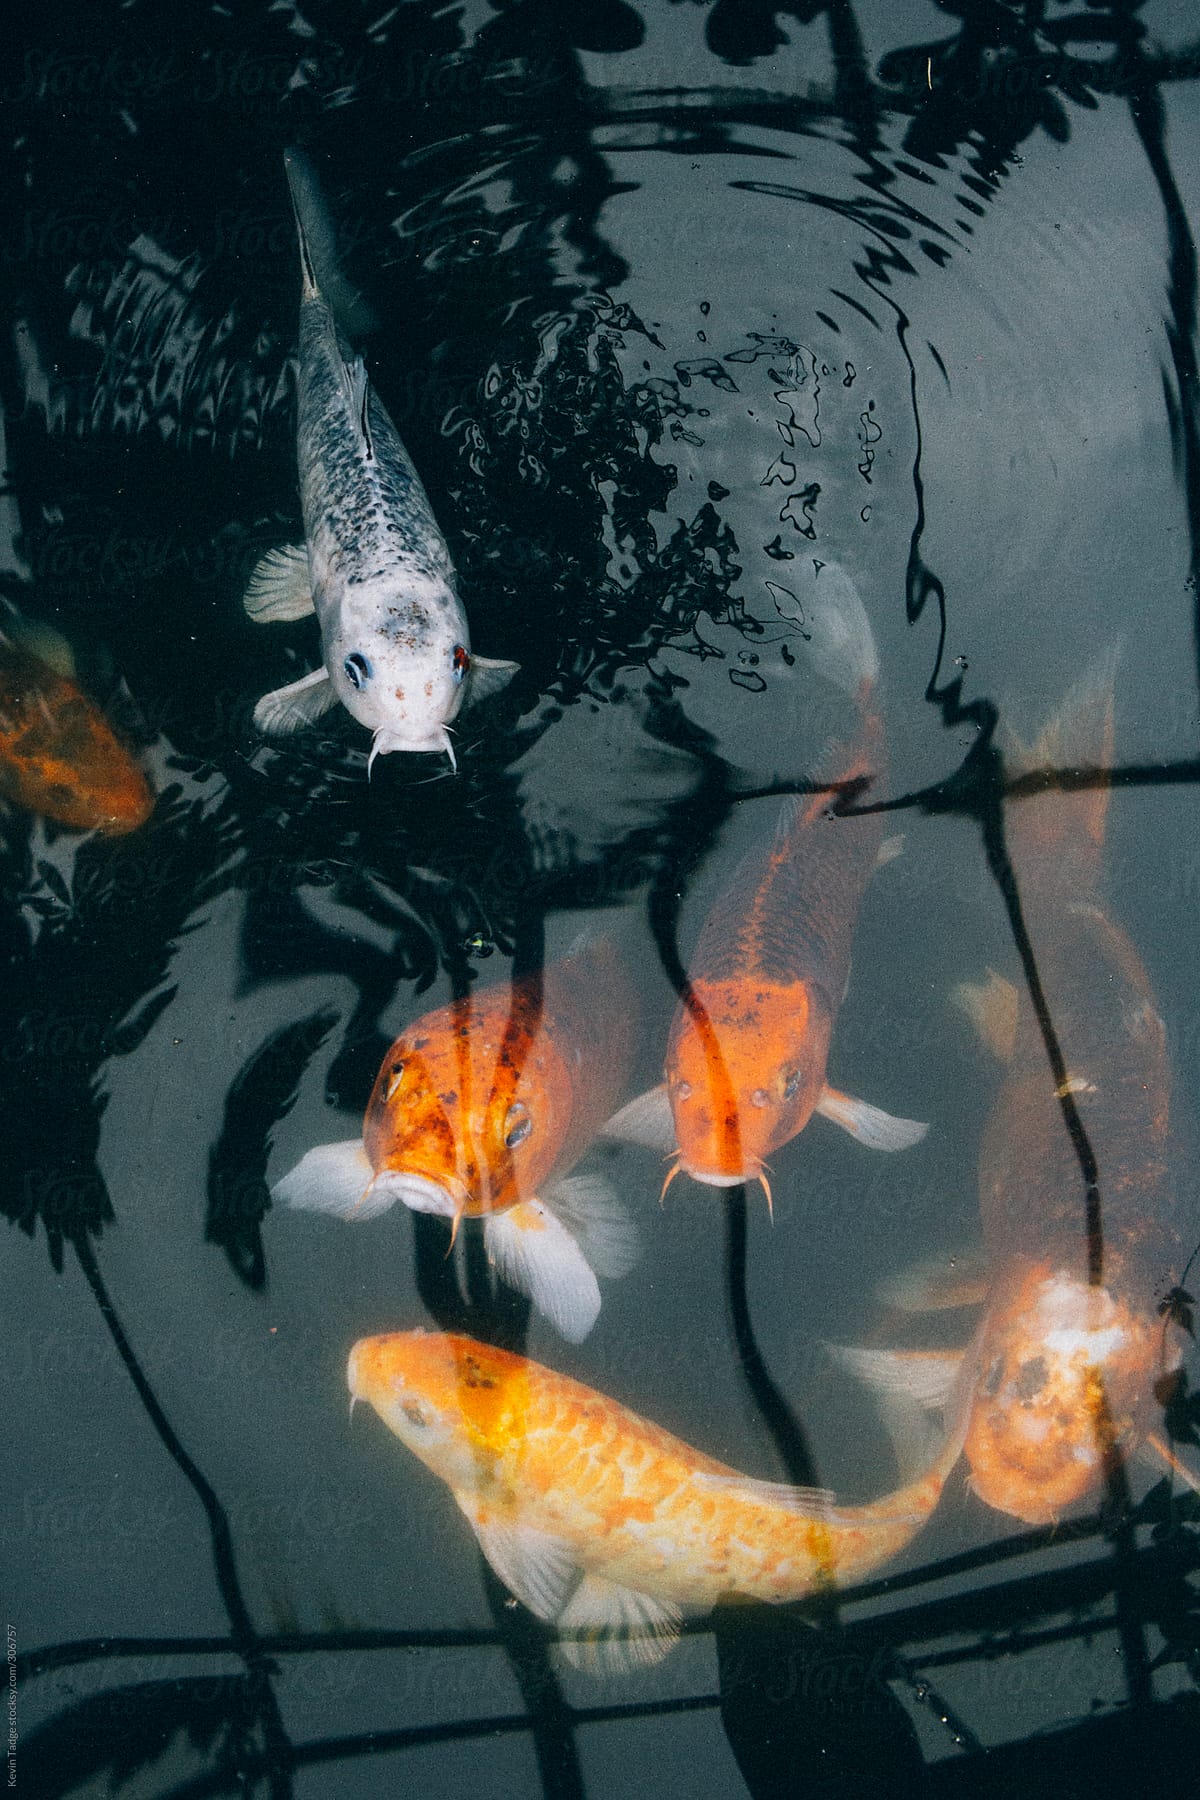 Koi Swimming in a Greenhouse Pond